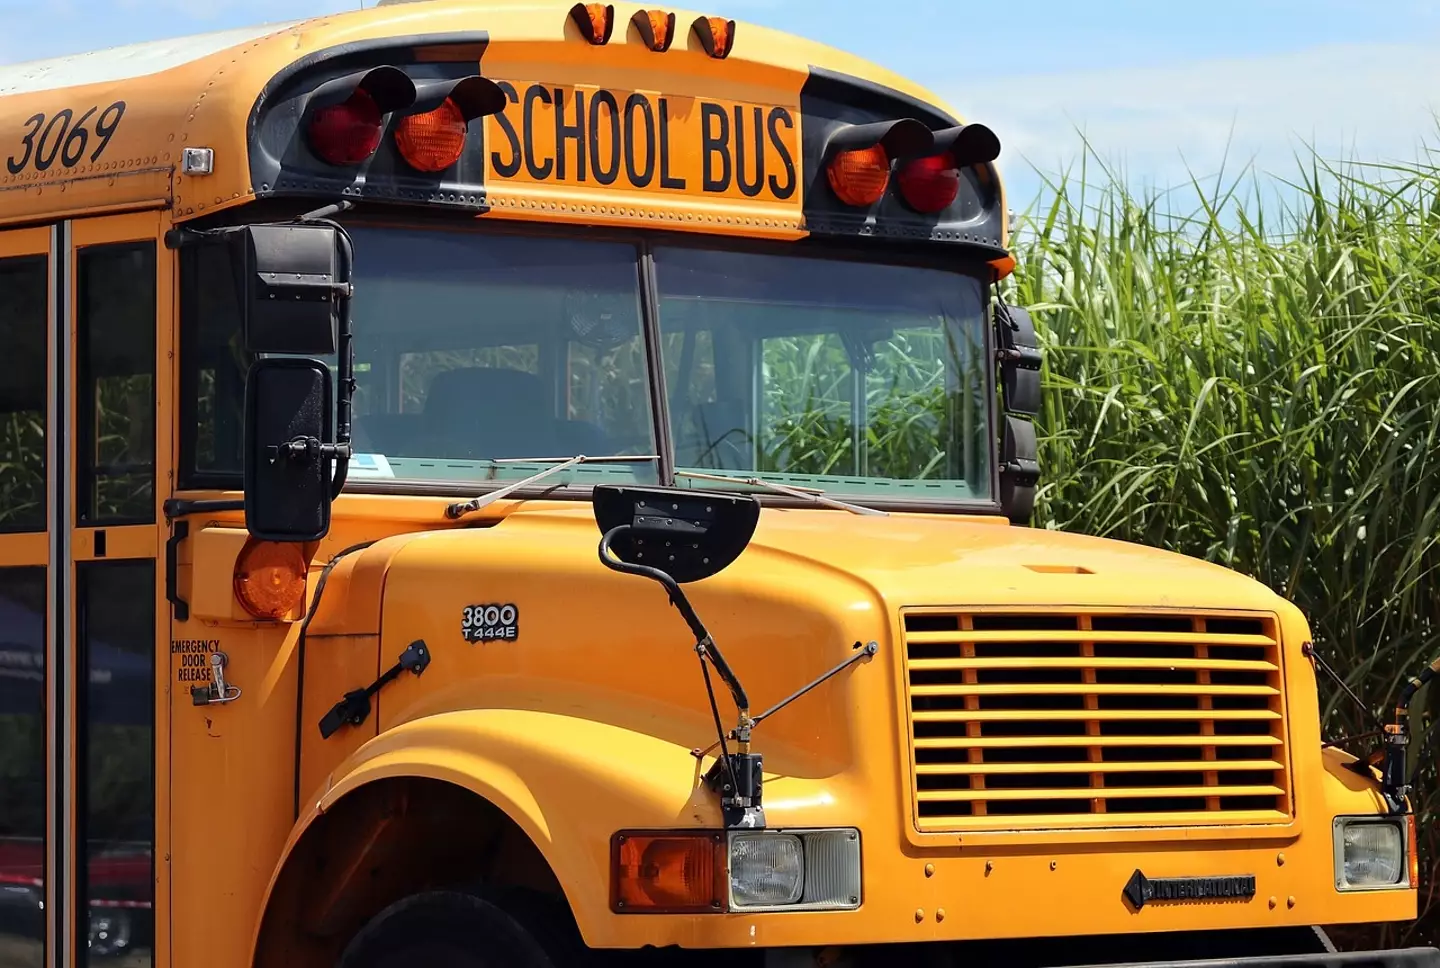 Police became aware of the boy after a school bus incident. (Pixabay)